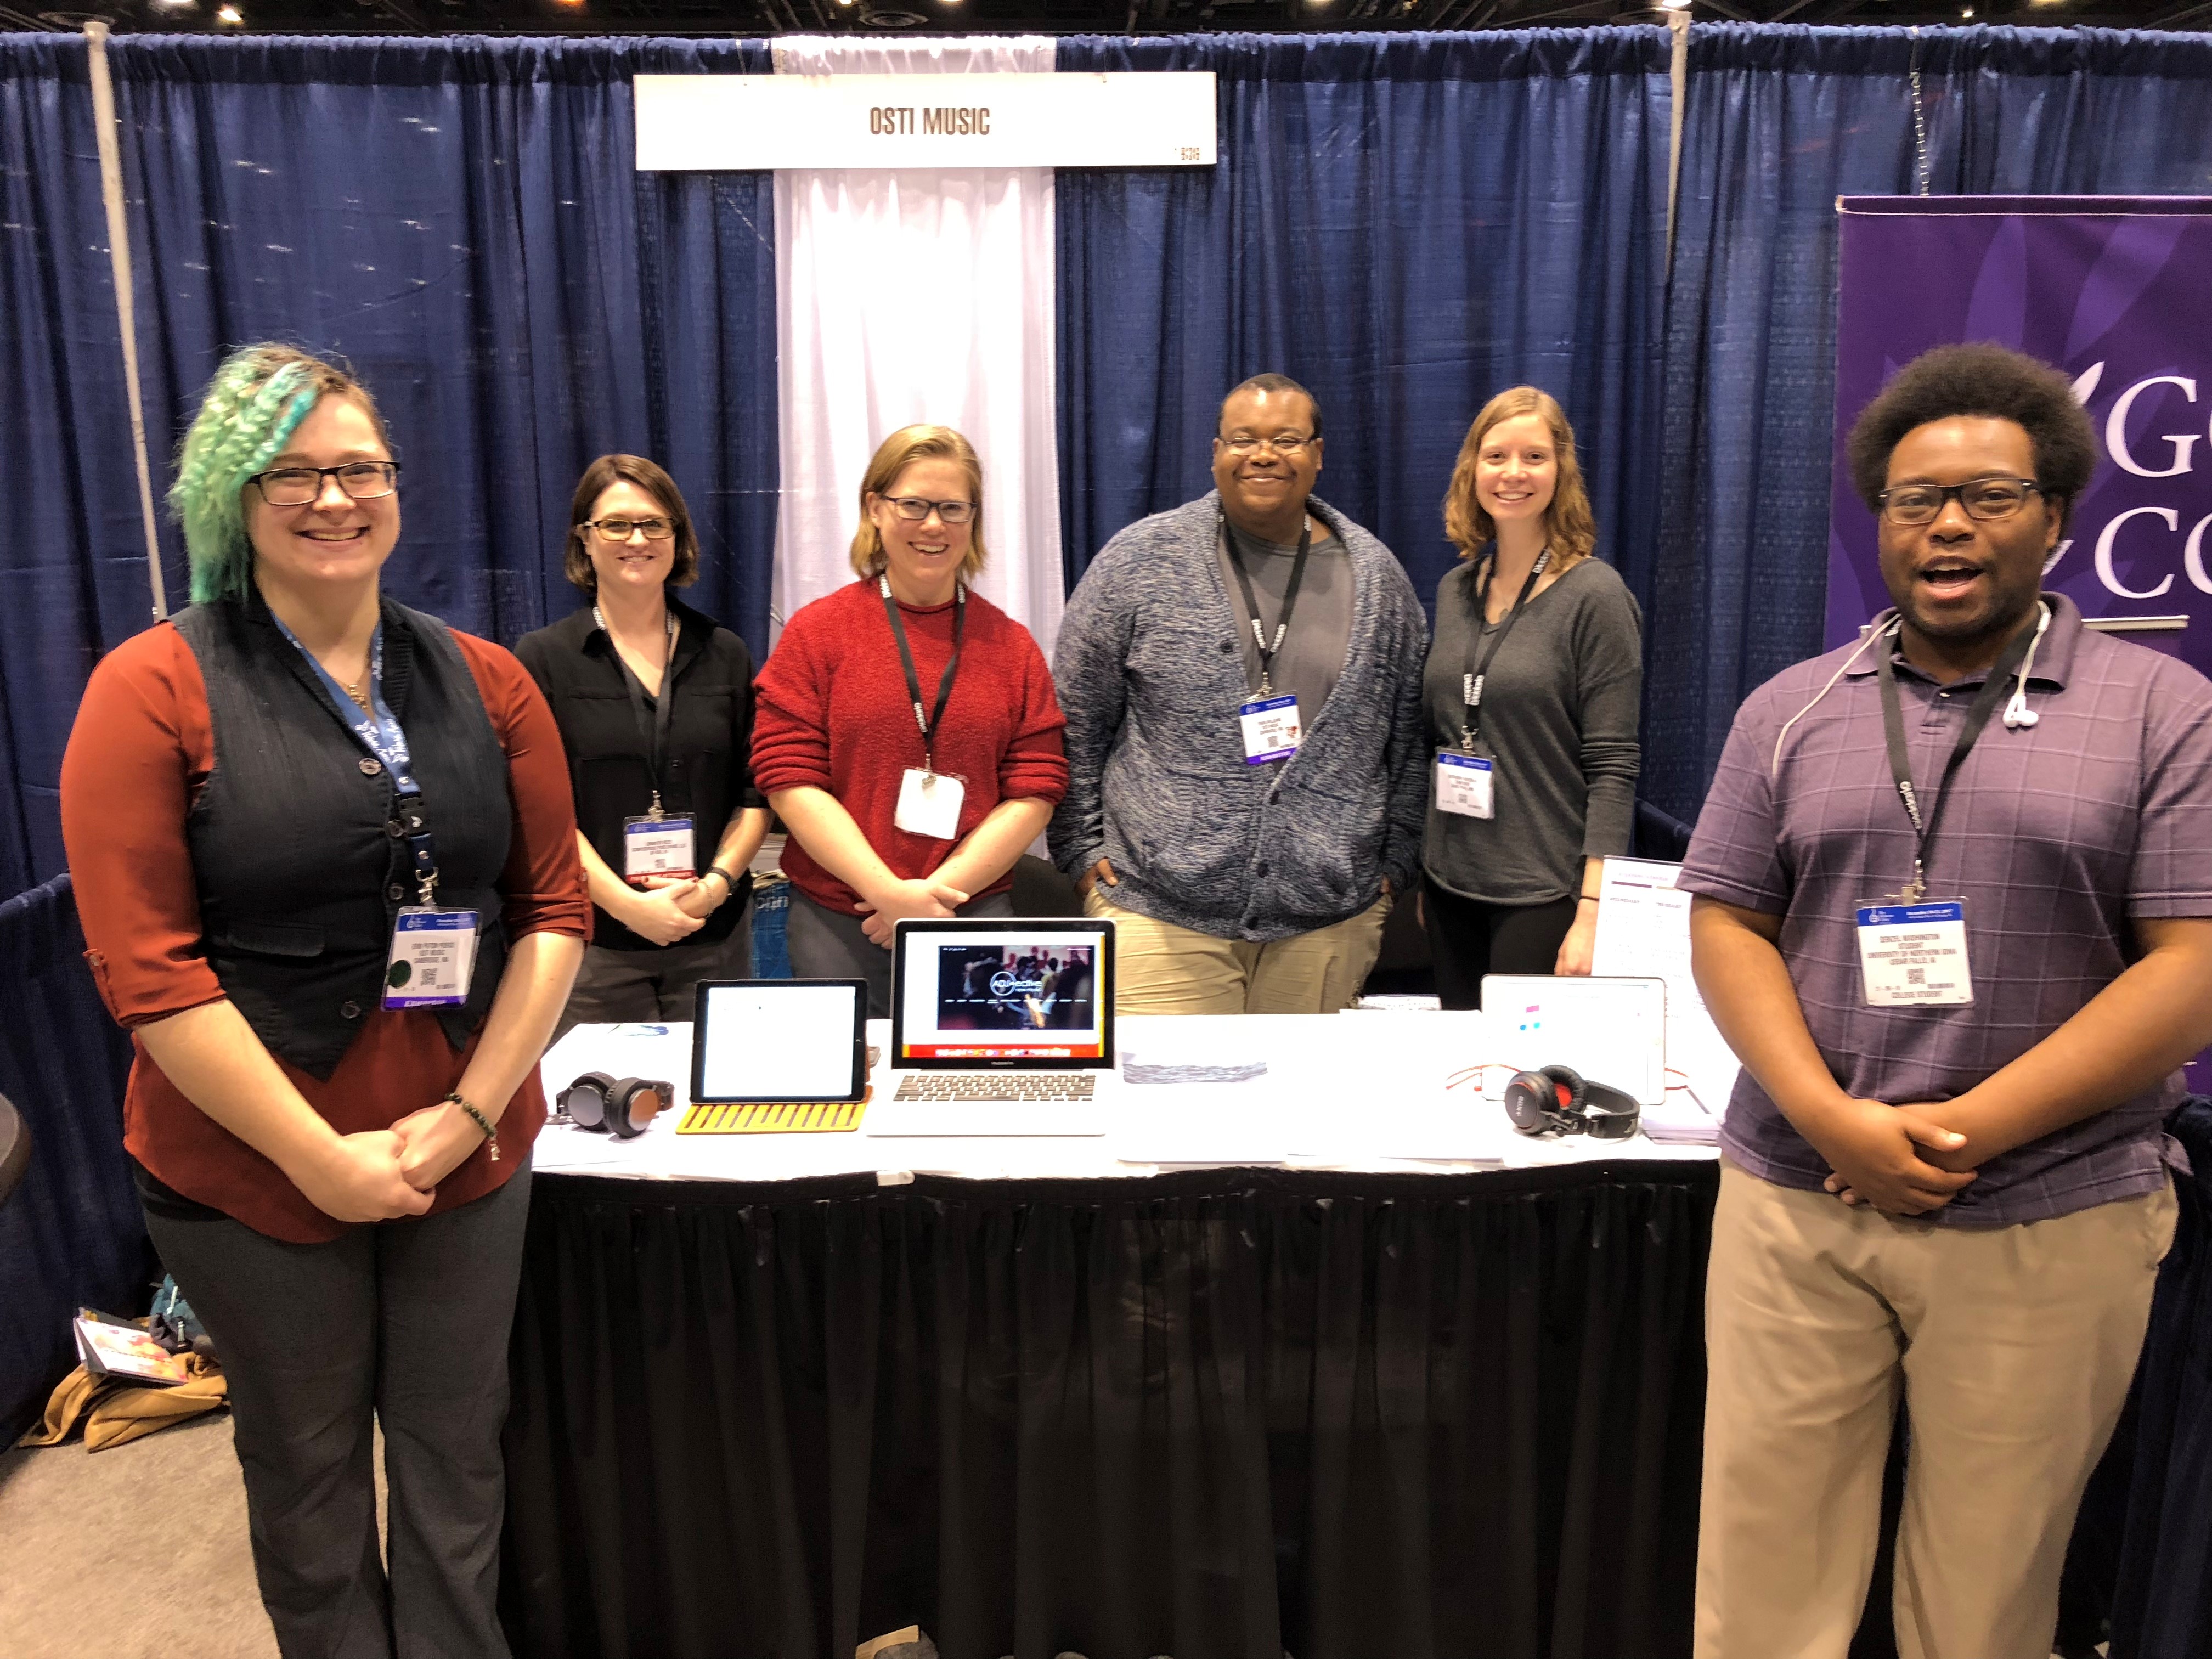 Six of the composers who were promoting their music at the Osti Music Booth at the 2017 Midwest Clinic.